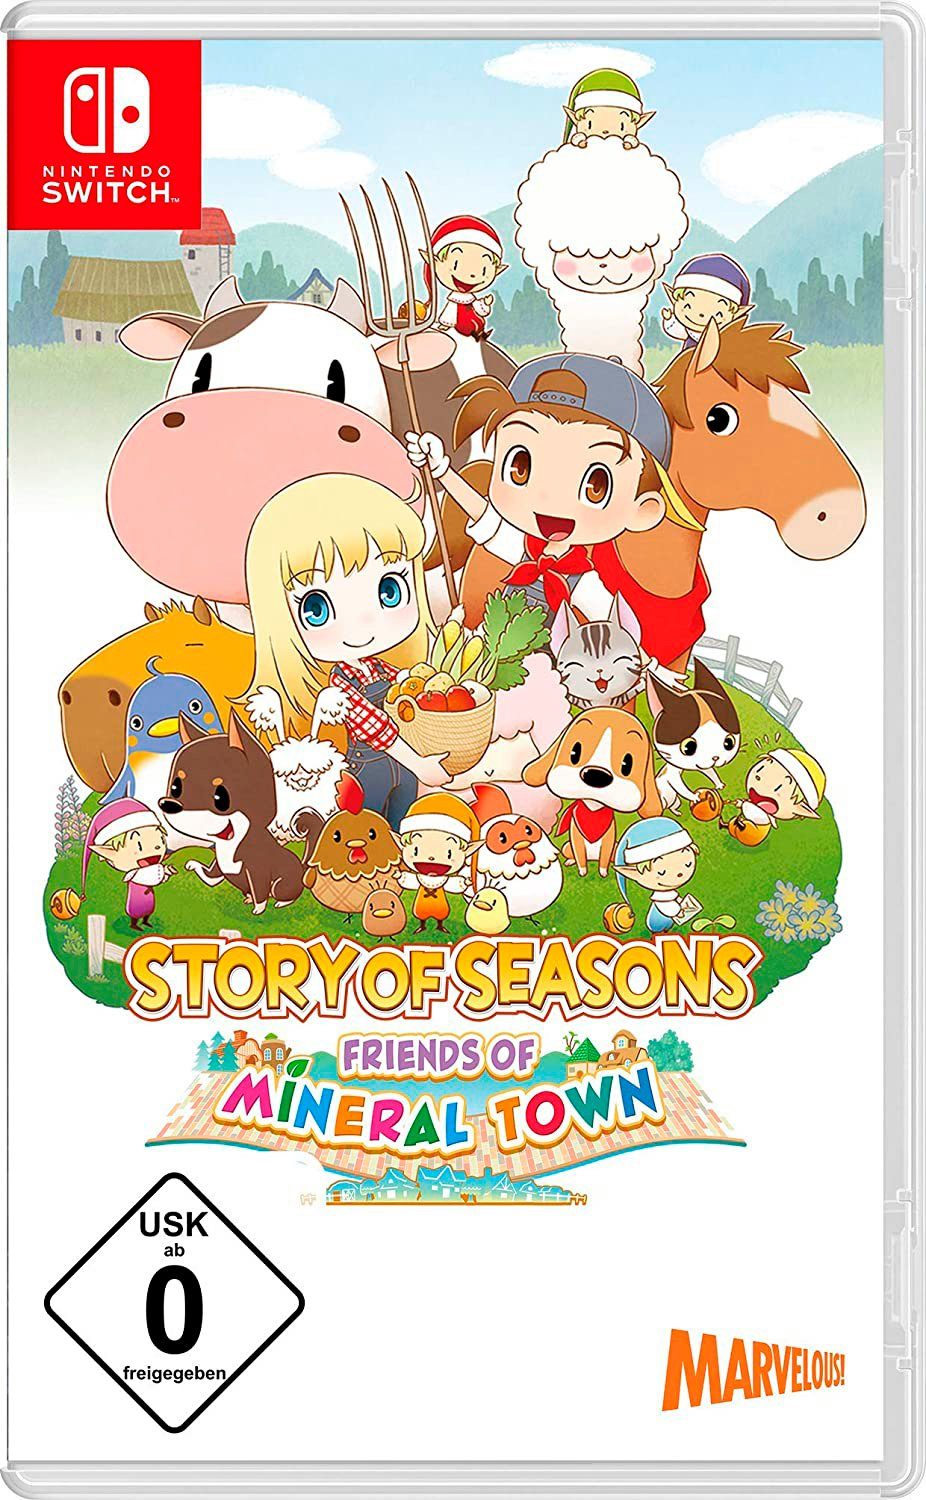 Nintendo Of Of Mineral Switch Friends Town Story Seasons: